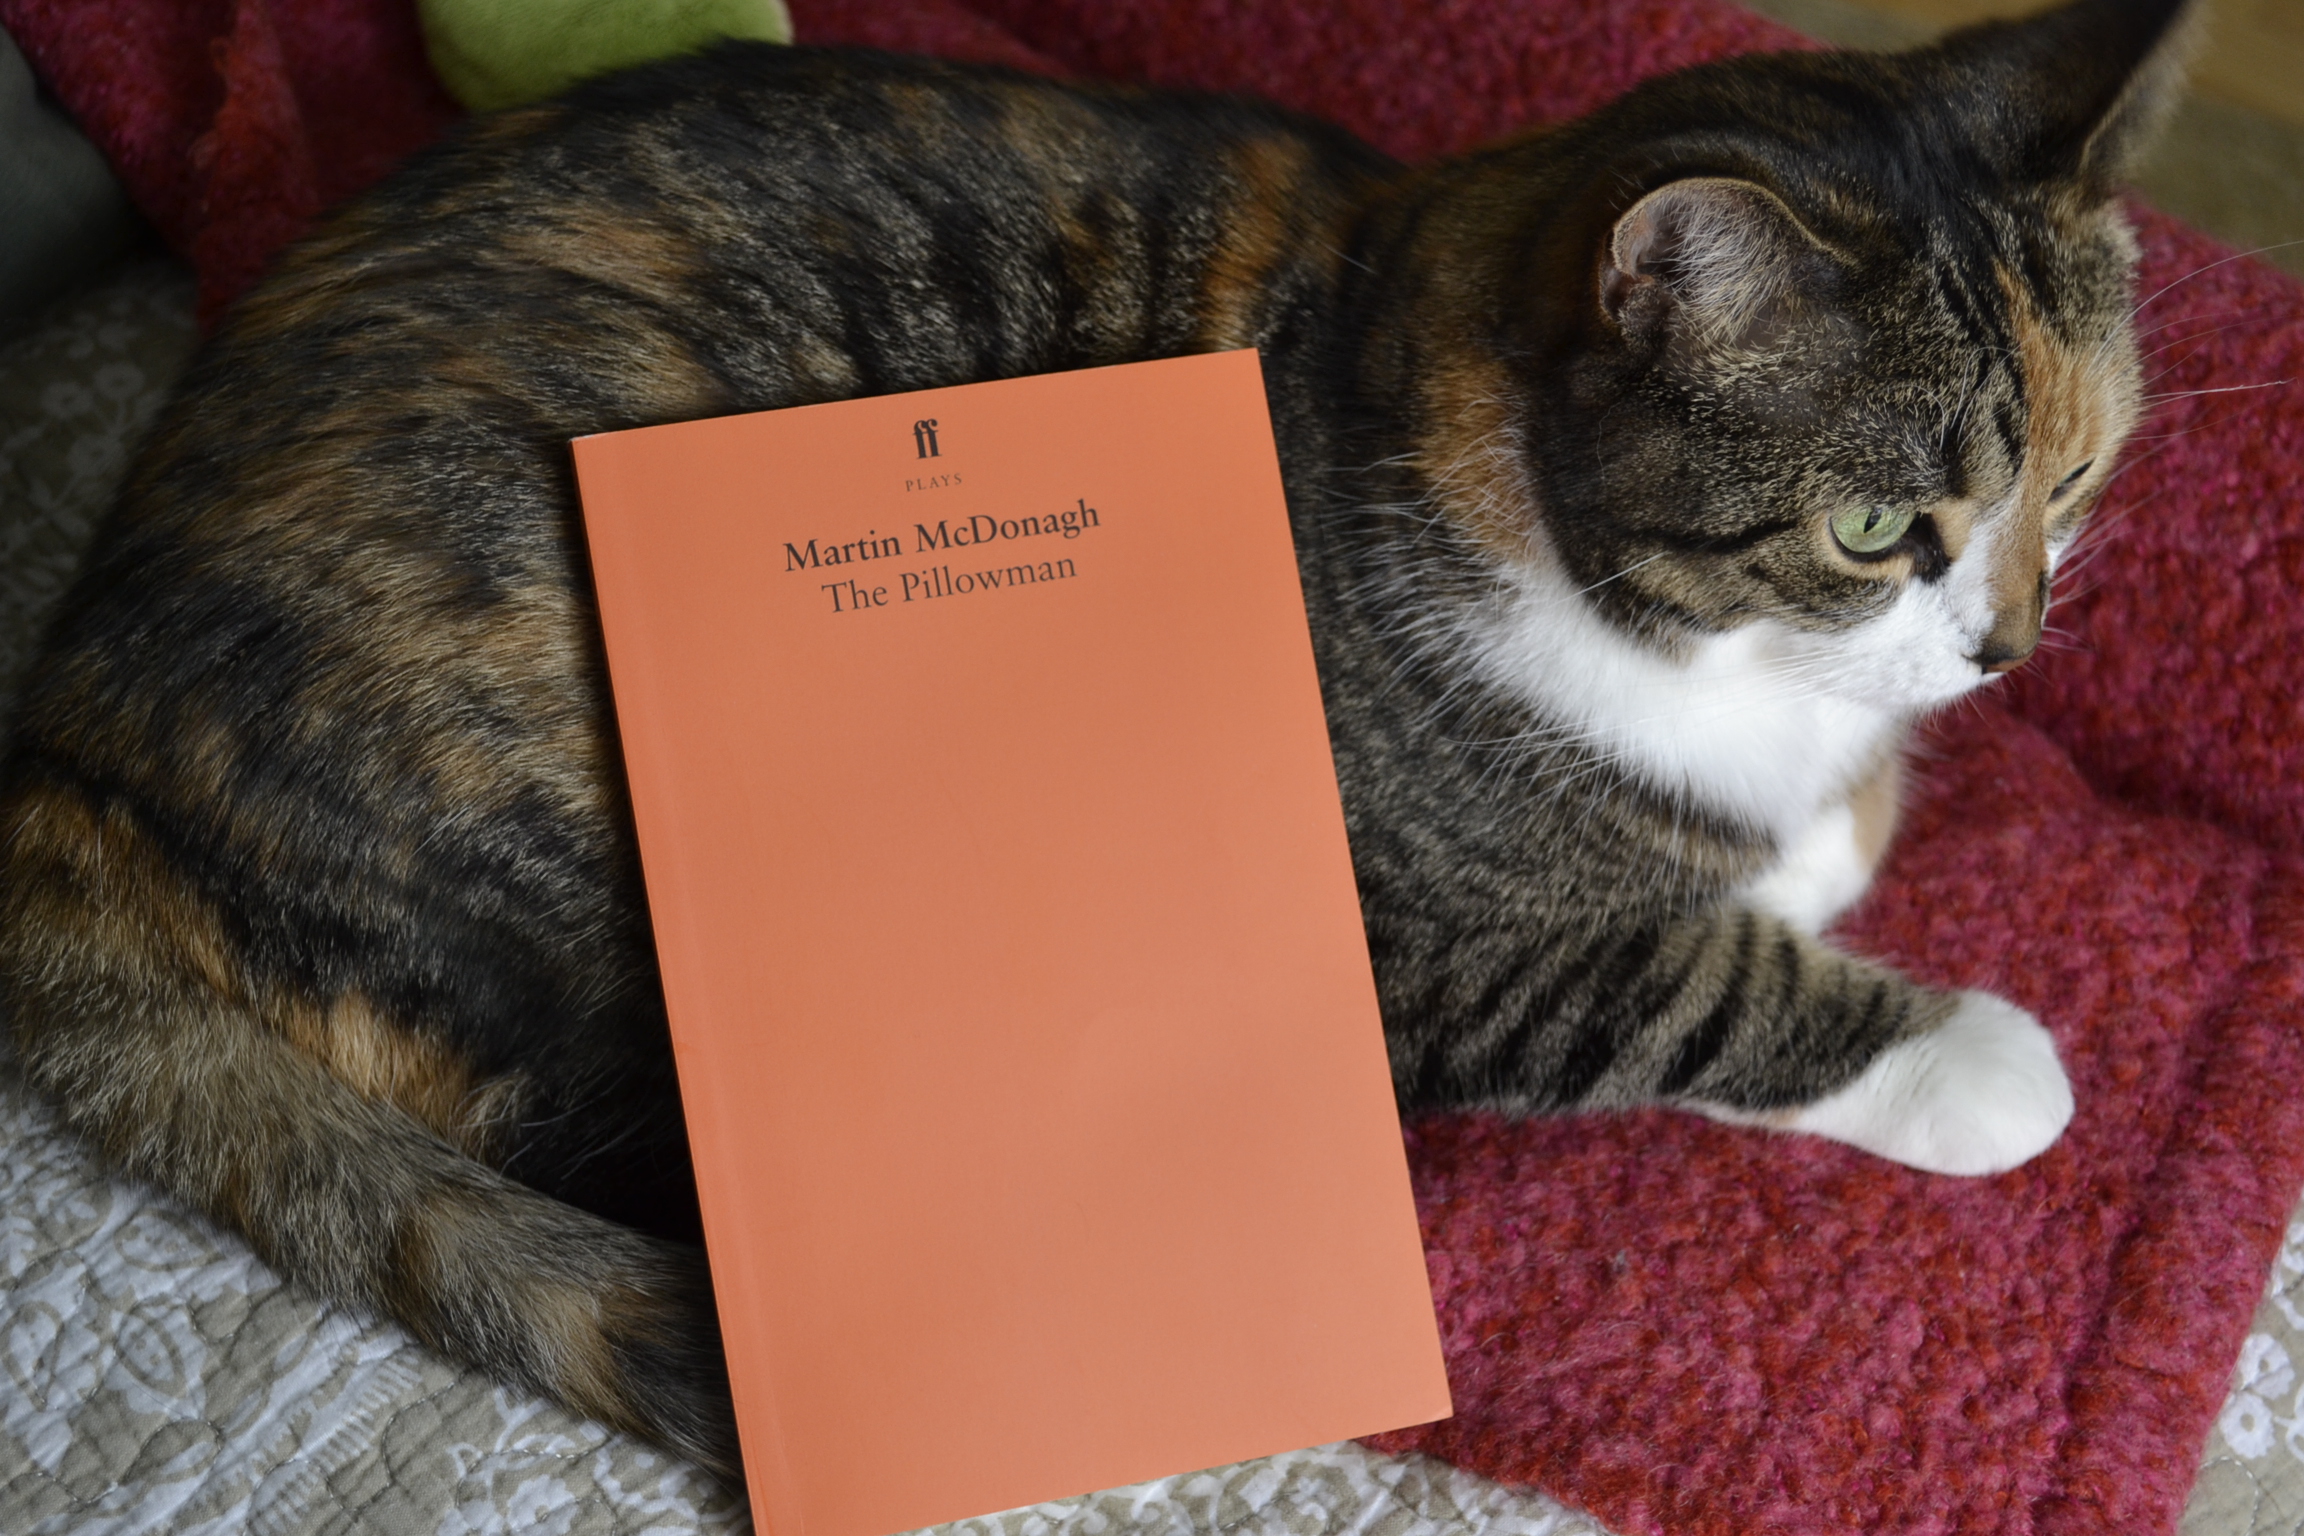 An orange book — The Pillowman — lies against the side of a calico tabby.